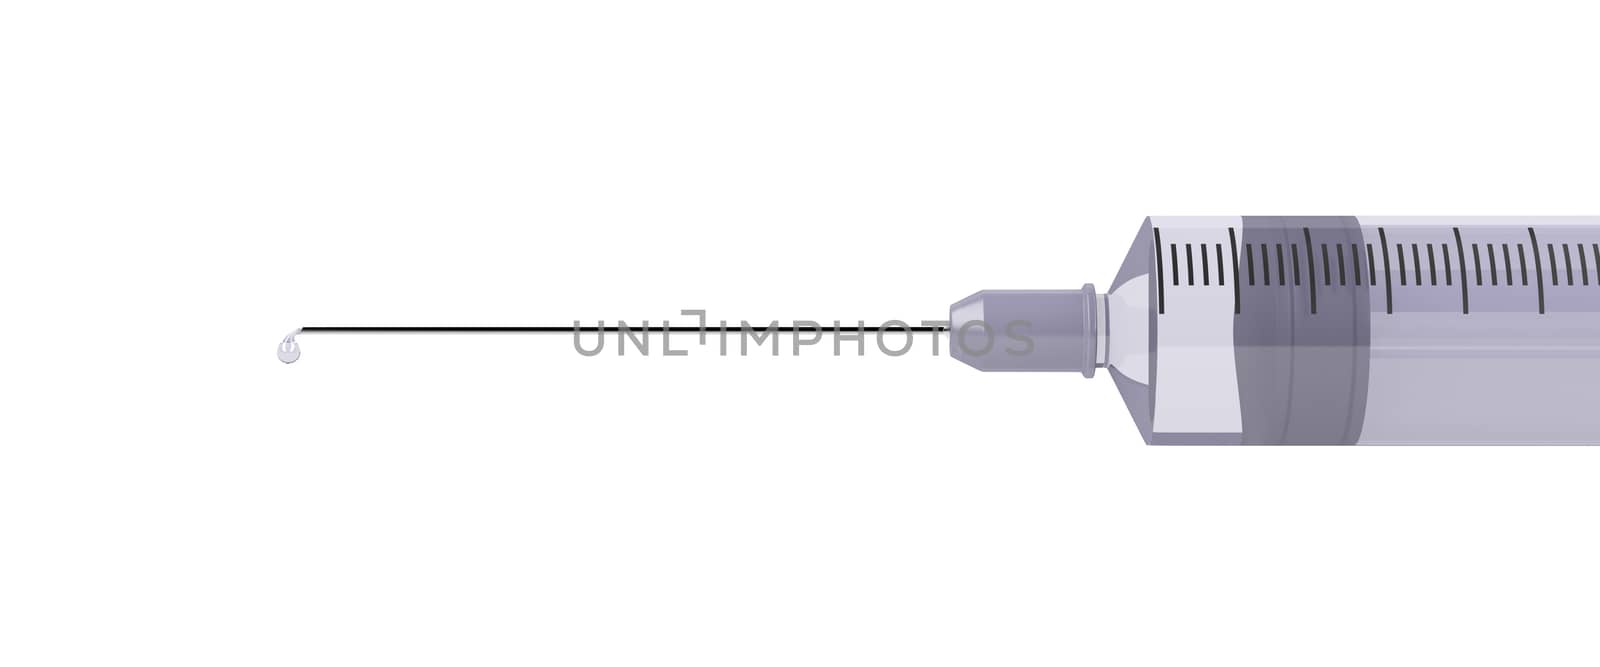 Medical syringe on white  by magraphics